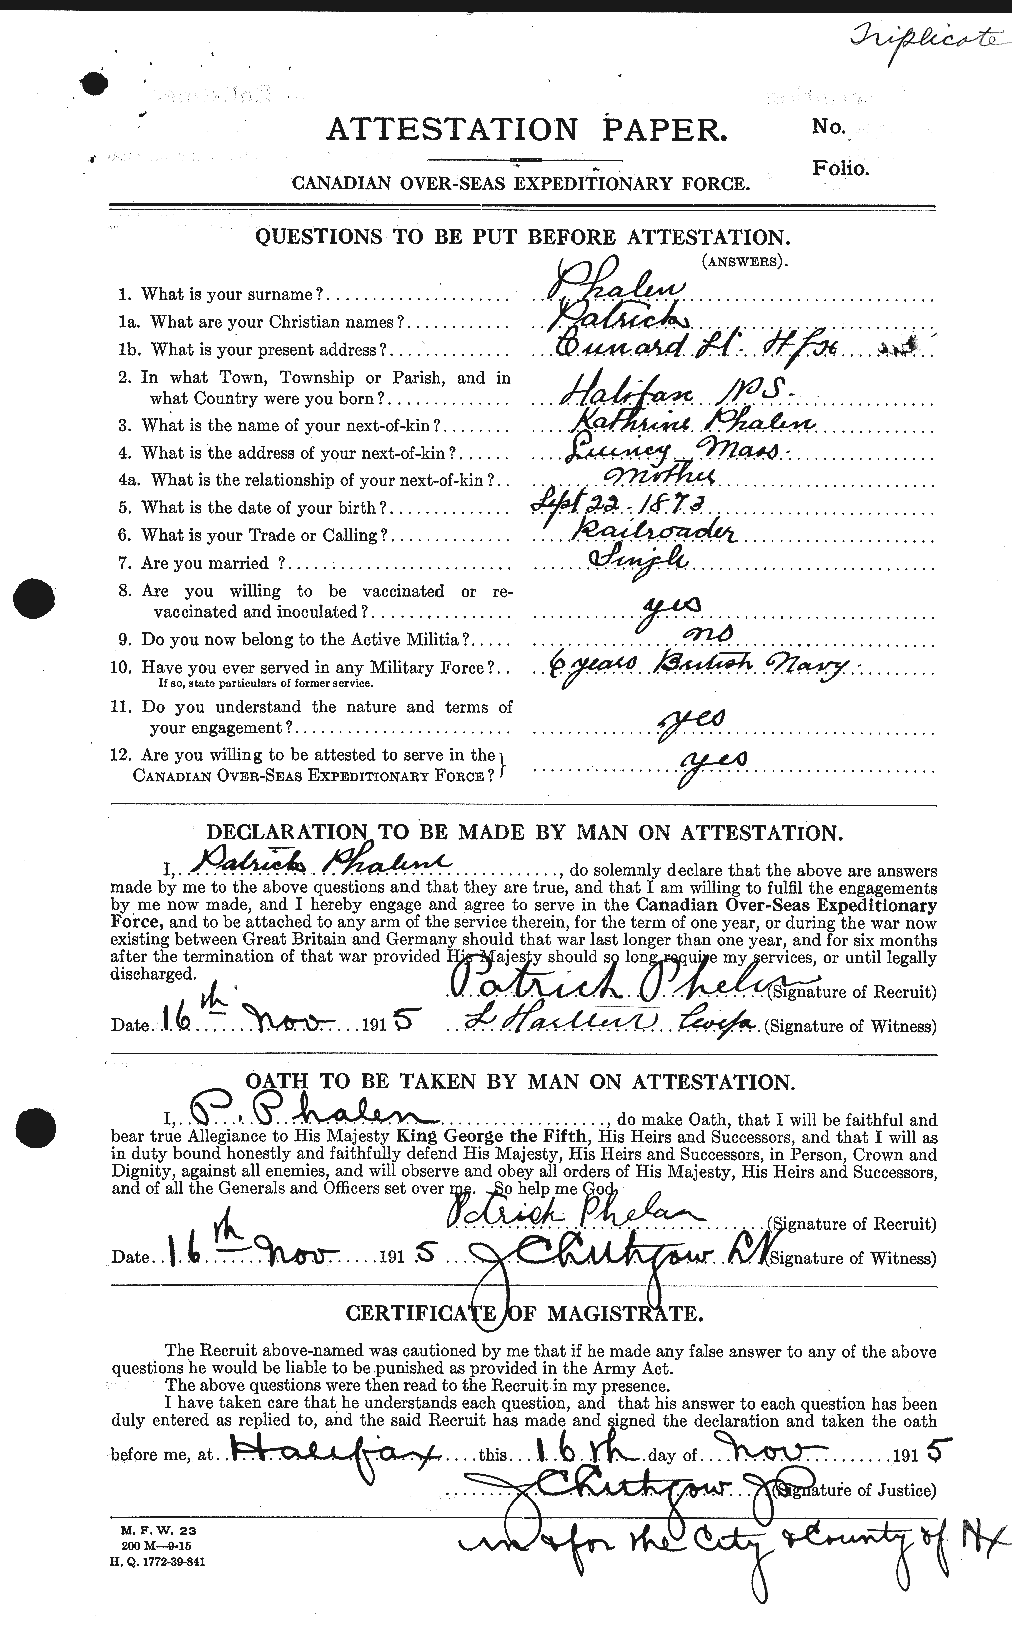 Personnel Records of the First World War - CEF 576961a